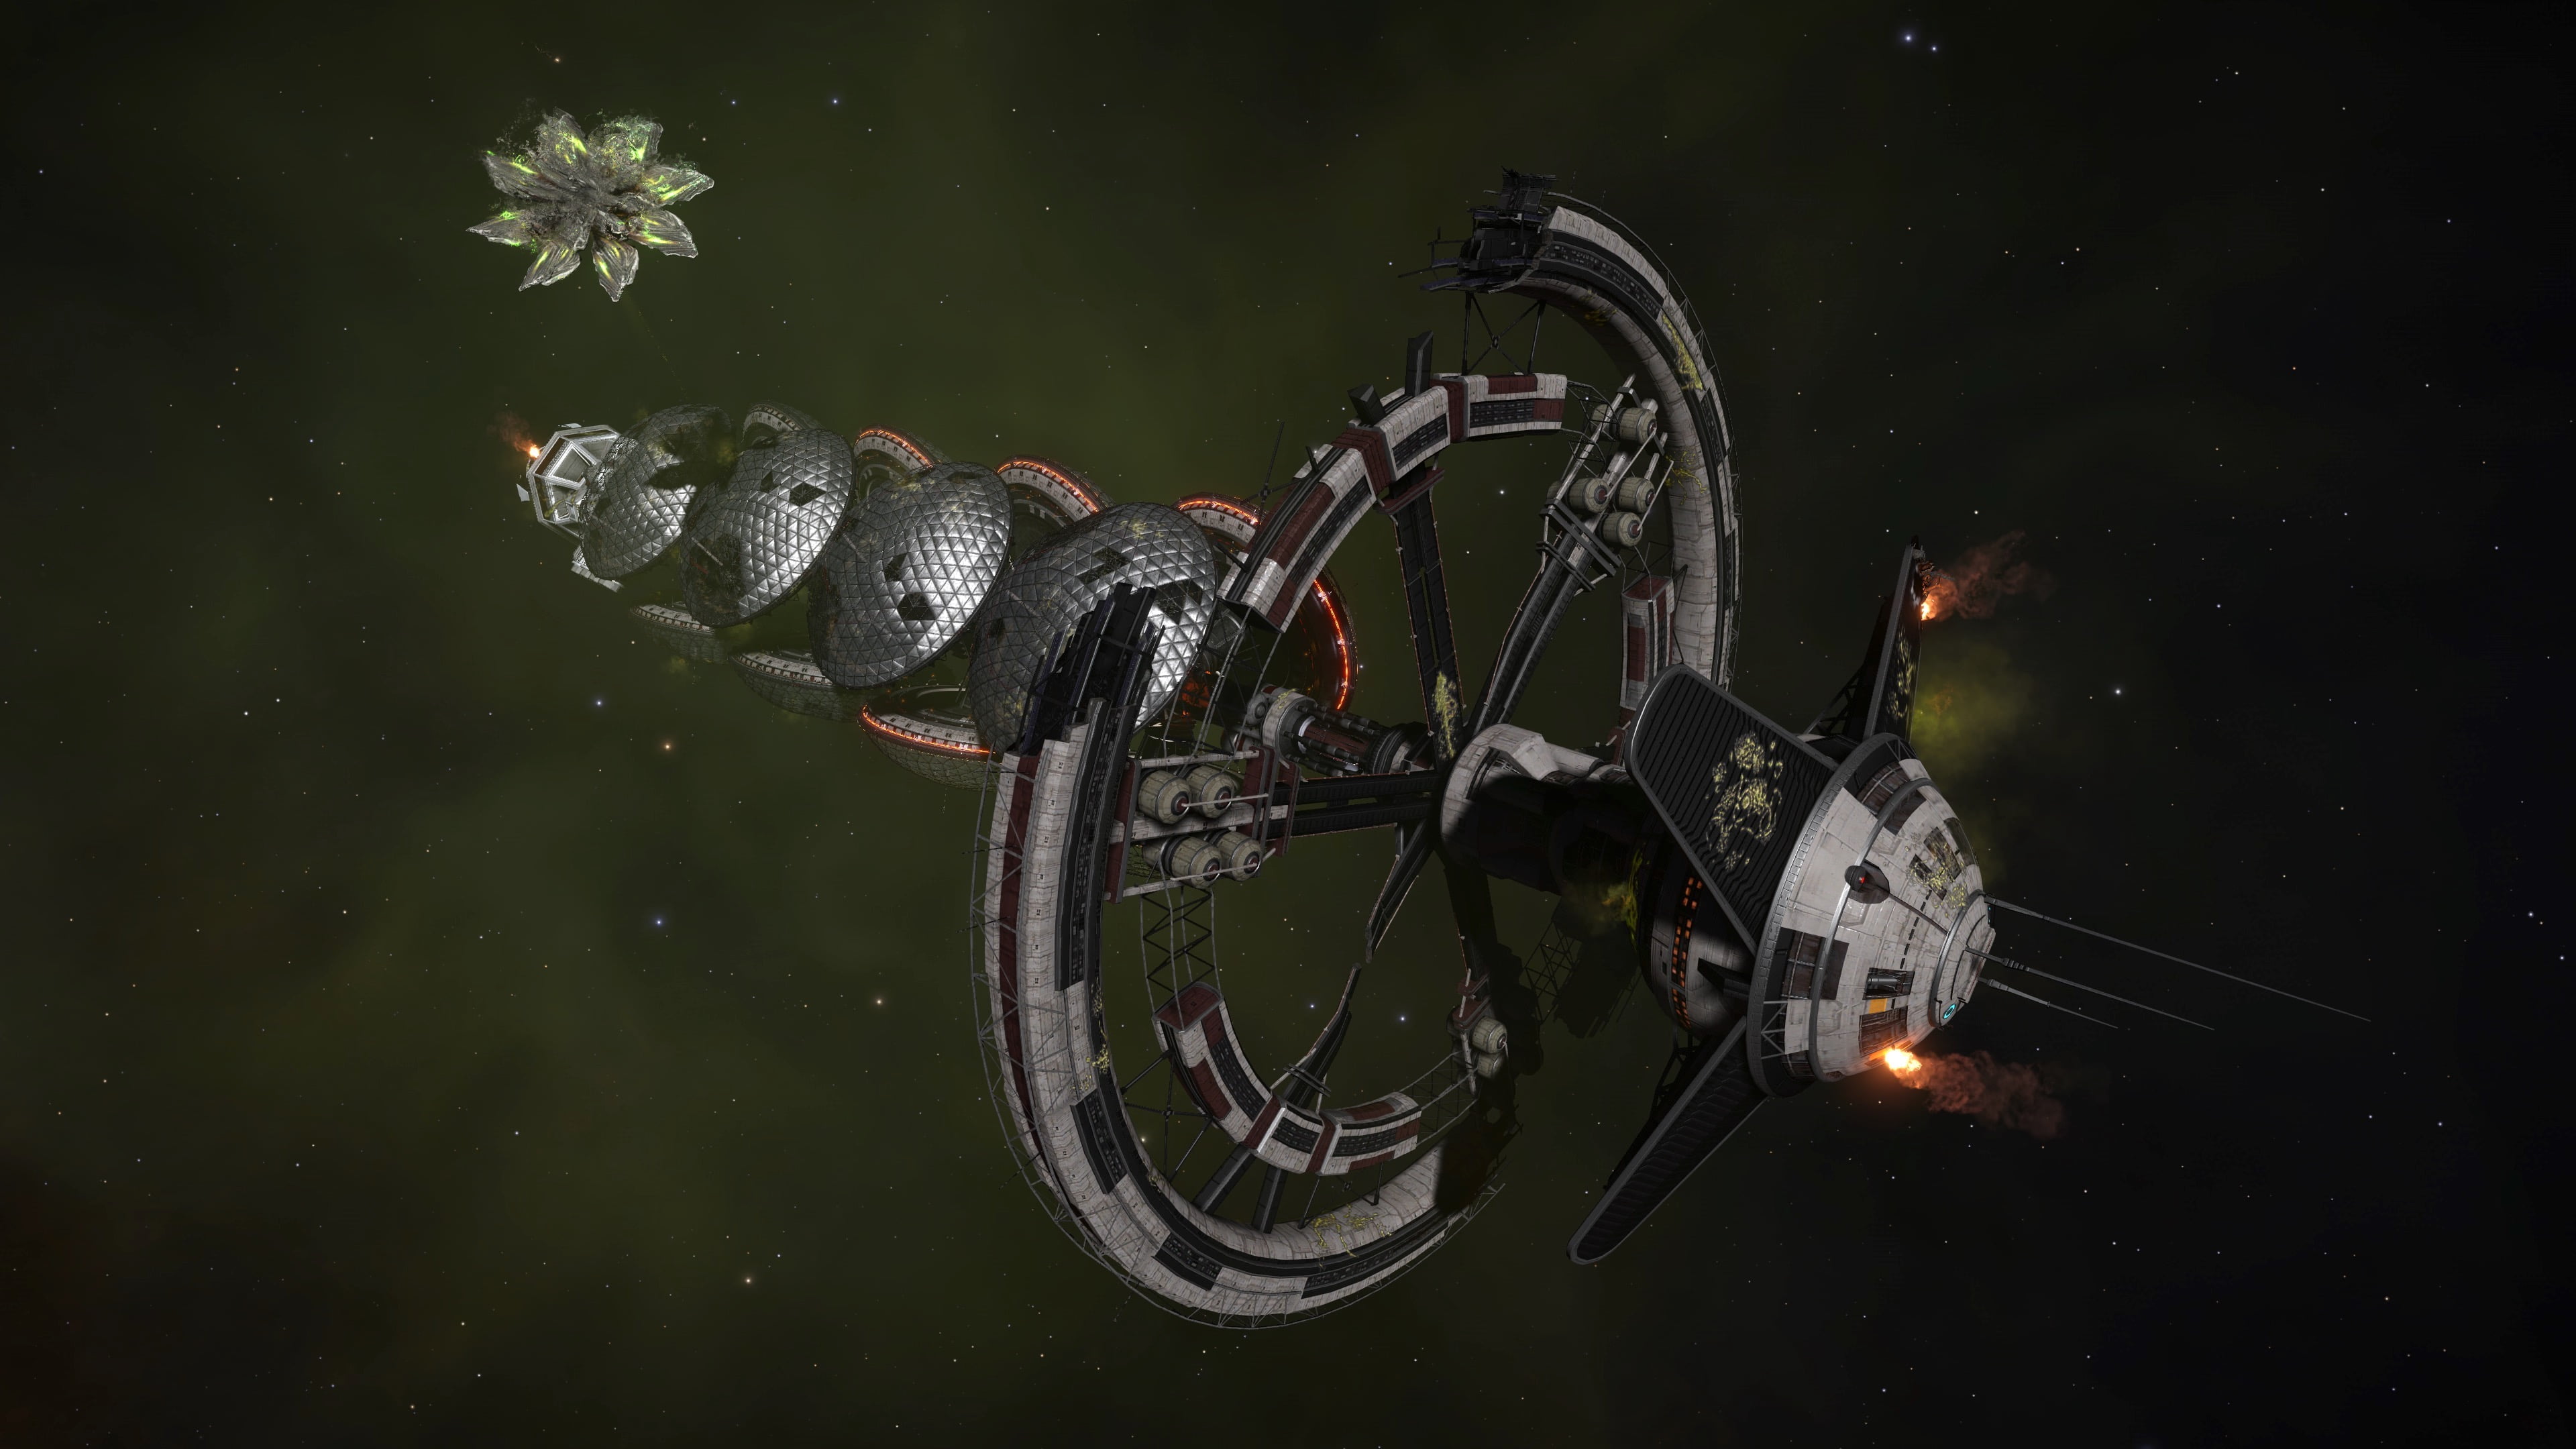 Elite Dangerous update 15 adds a new Thargoid ship and on-foot